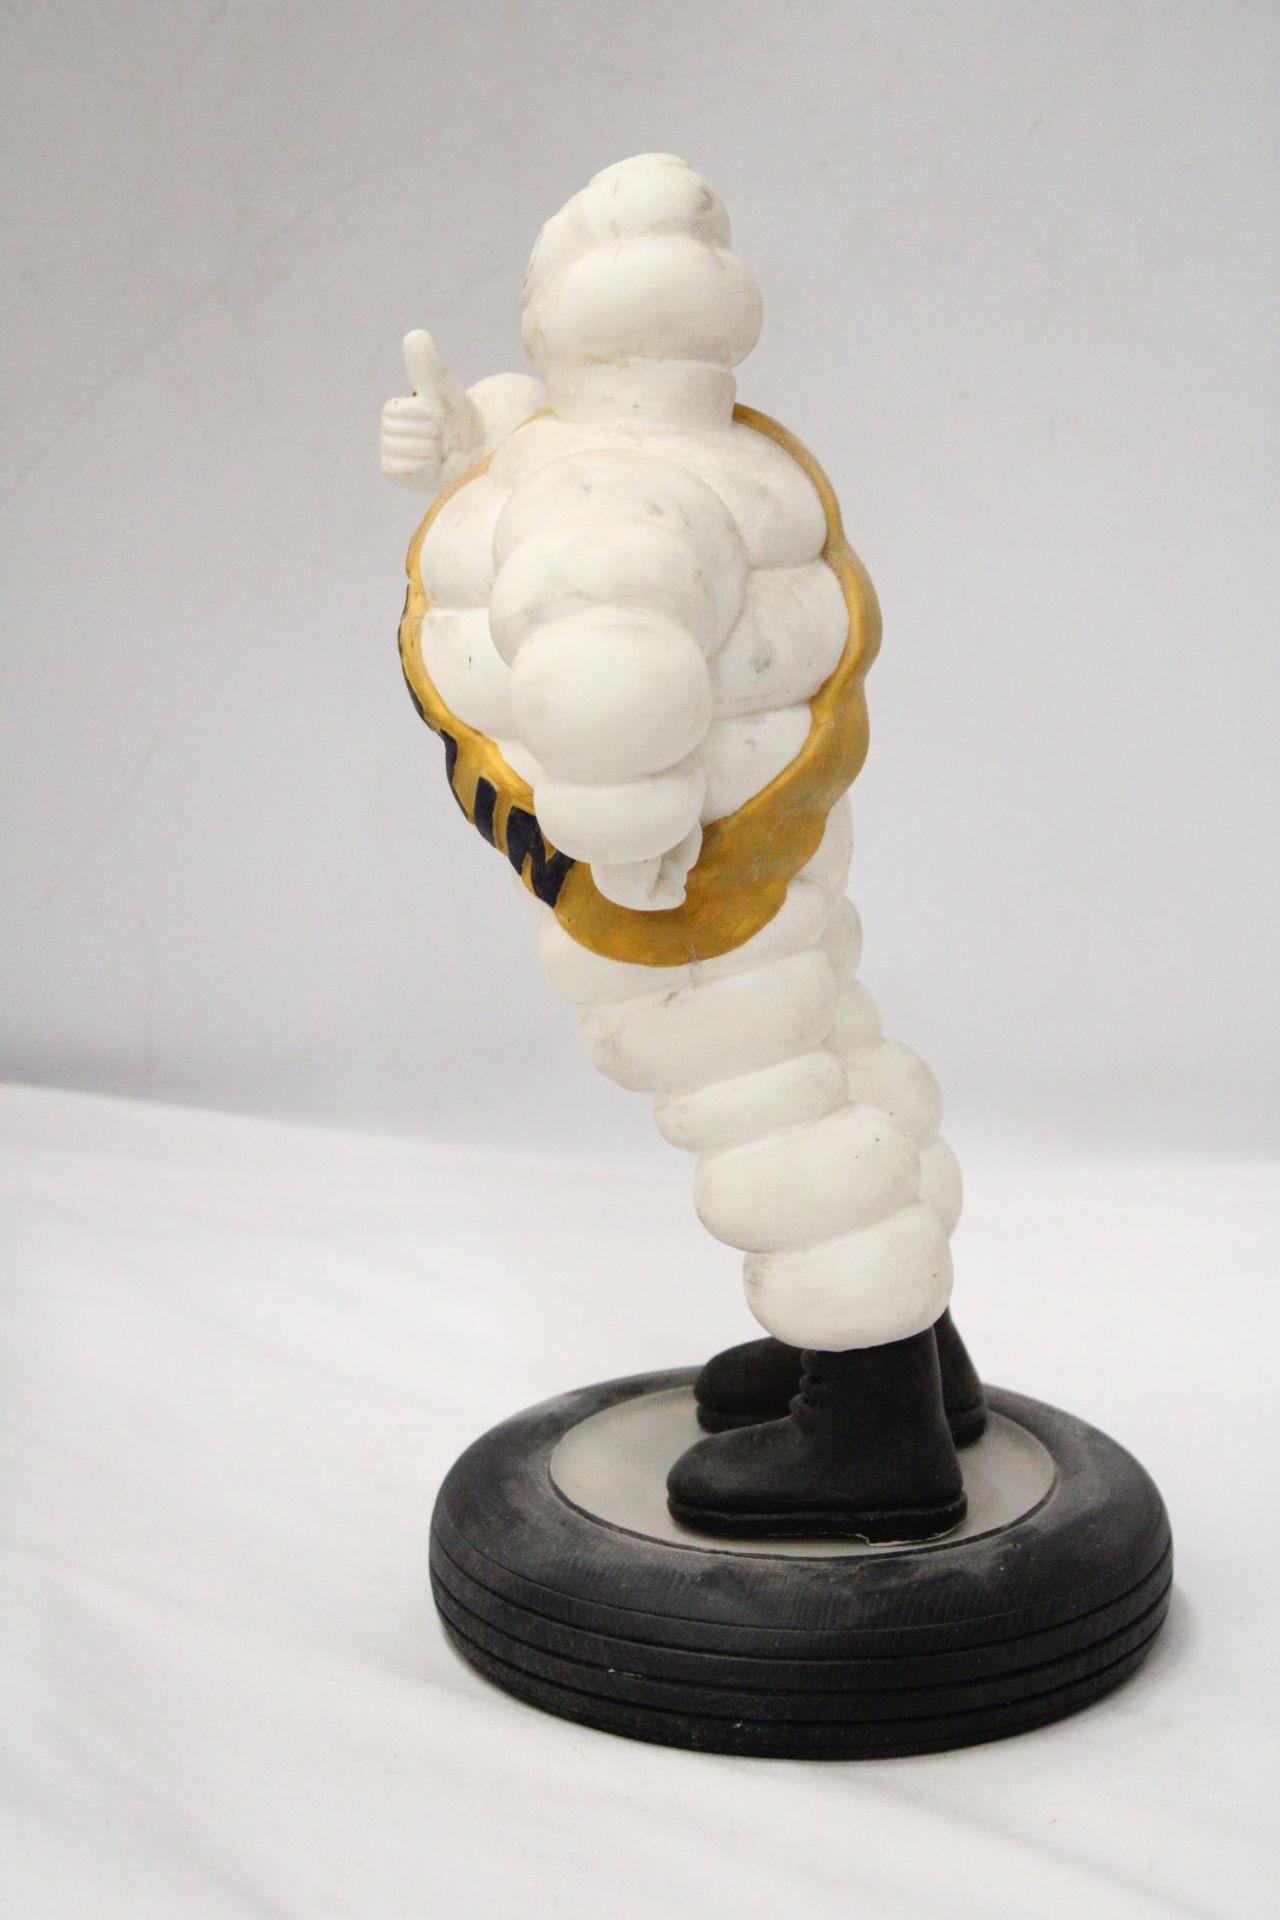 A VINTAGE MICHELIN MAN ON TYRE APPROXIMATELY 33 CM HIGH - Image 3 of 5